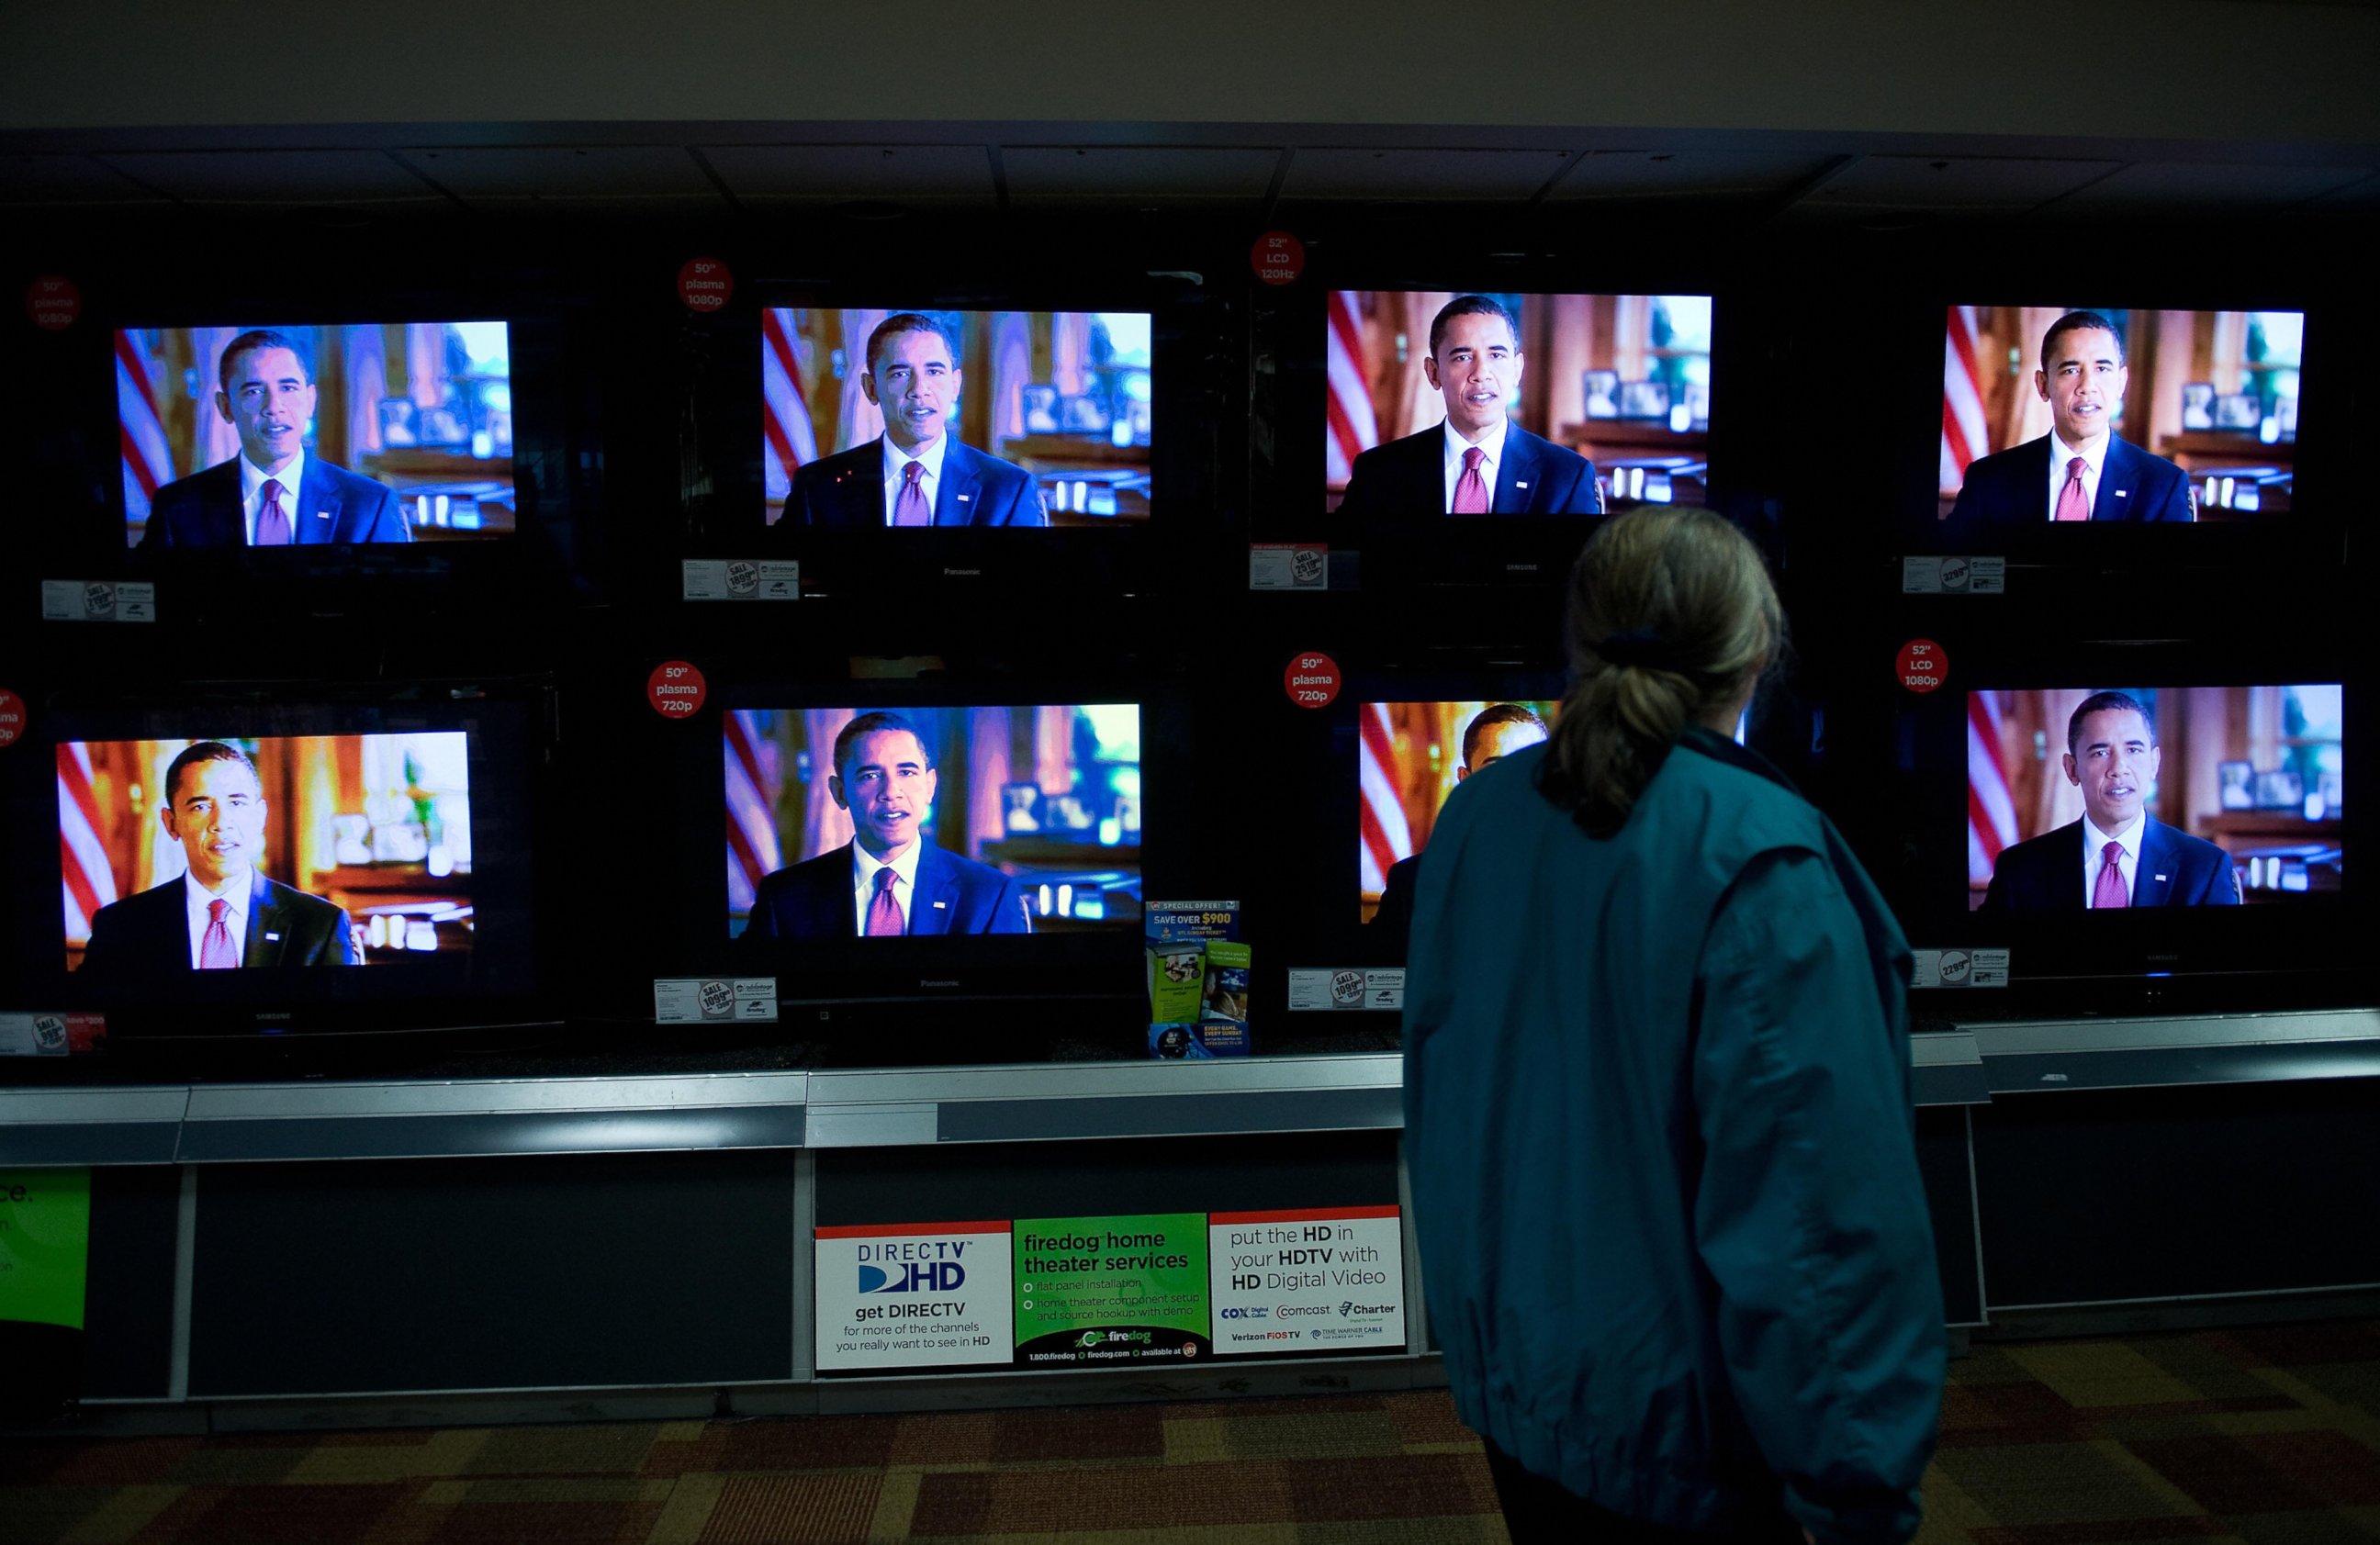 PHOTO: A woman watches Barack Obama on television screens at an electronics shop in Wheaton, Maryland, Oct. 29, 2008, as he speaks during a 30-minute prime-time infomercial on all major networks. 